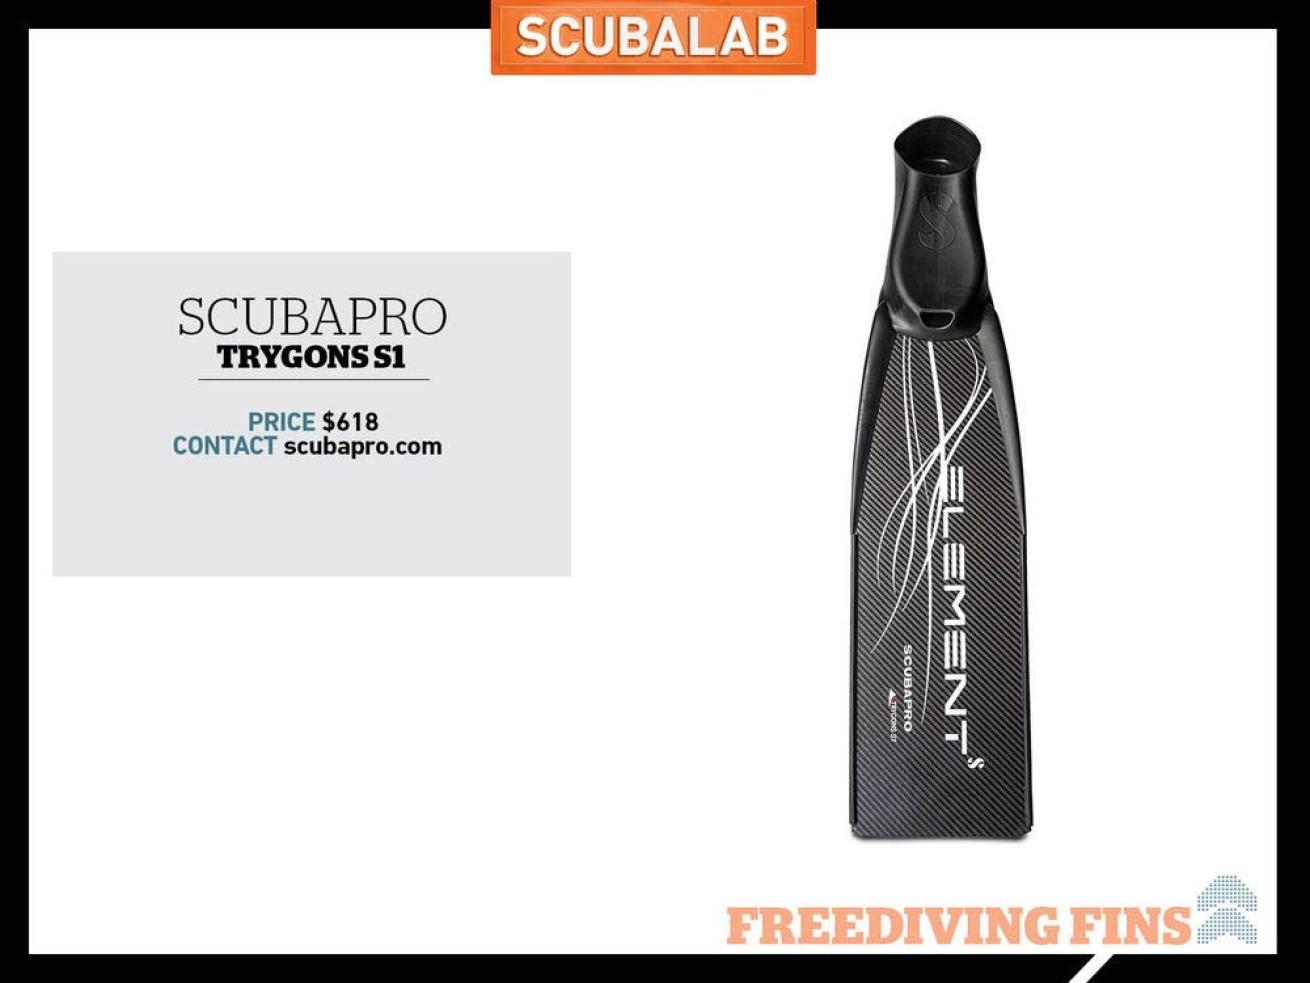 Scubapro Freediving Fins Trygons S1